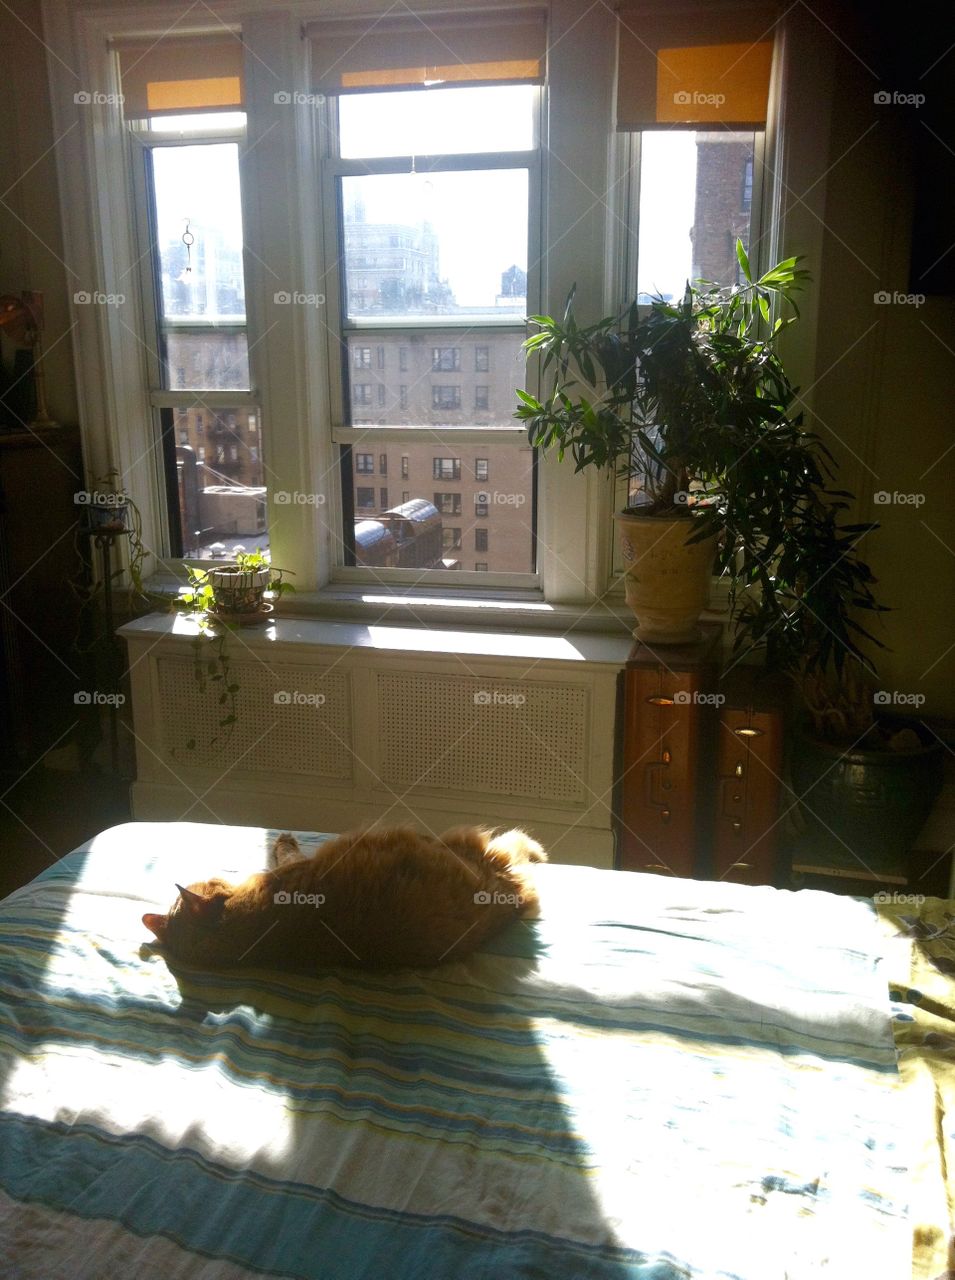 Afternoon cat nap. A kitty takes a nap in the afternoon sun.